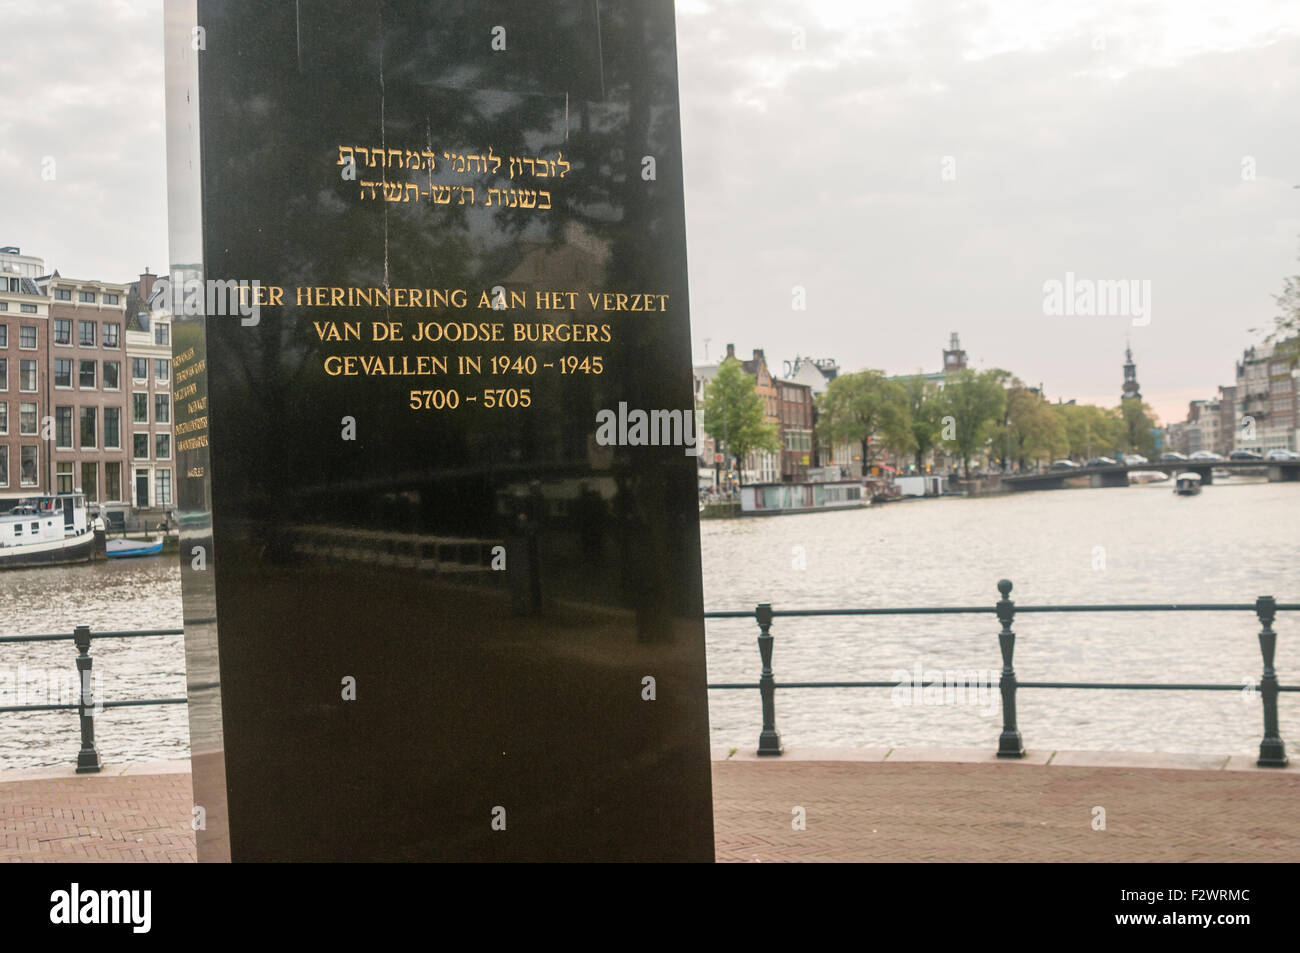 Memorial to the Jews killed in the second world war, including the Anno Mundi years from the Jewish calendar, Amsterdam Stock Photo